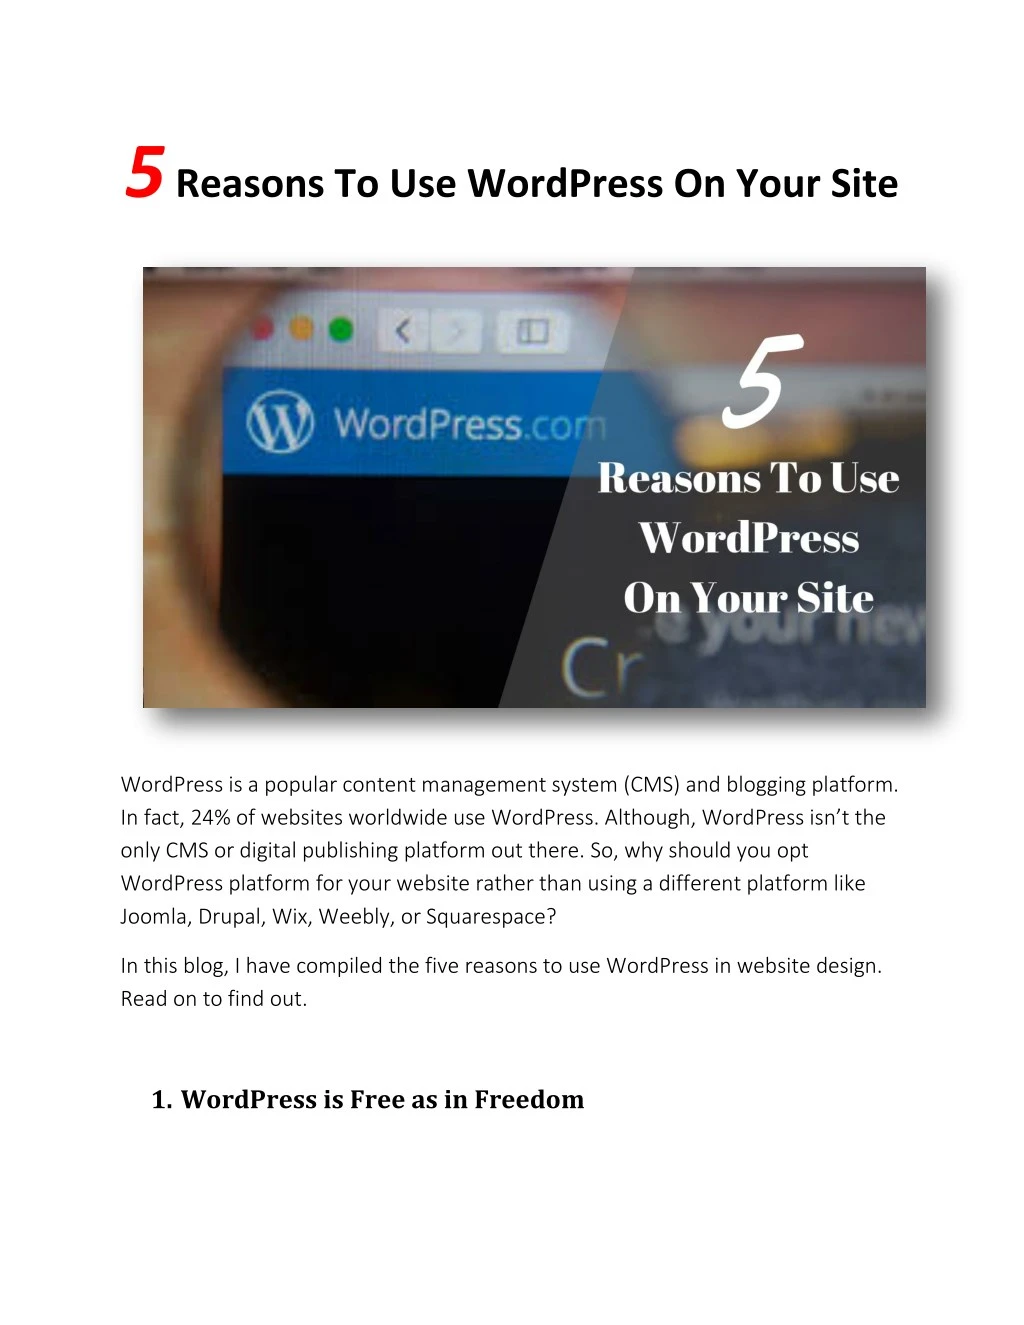 5 reasons to use wordpress on your site